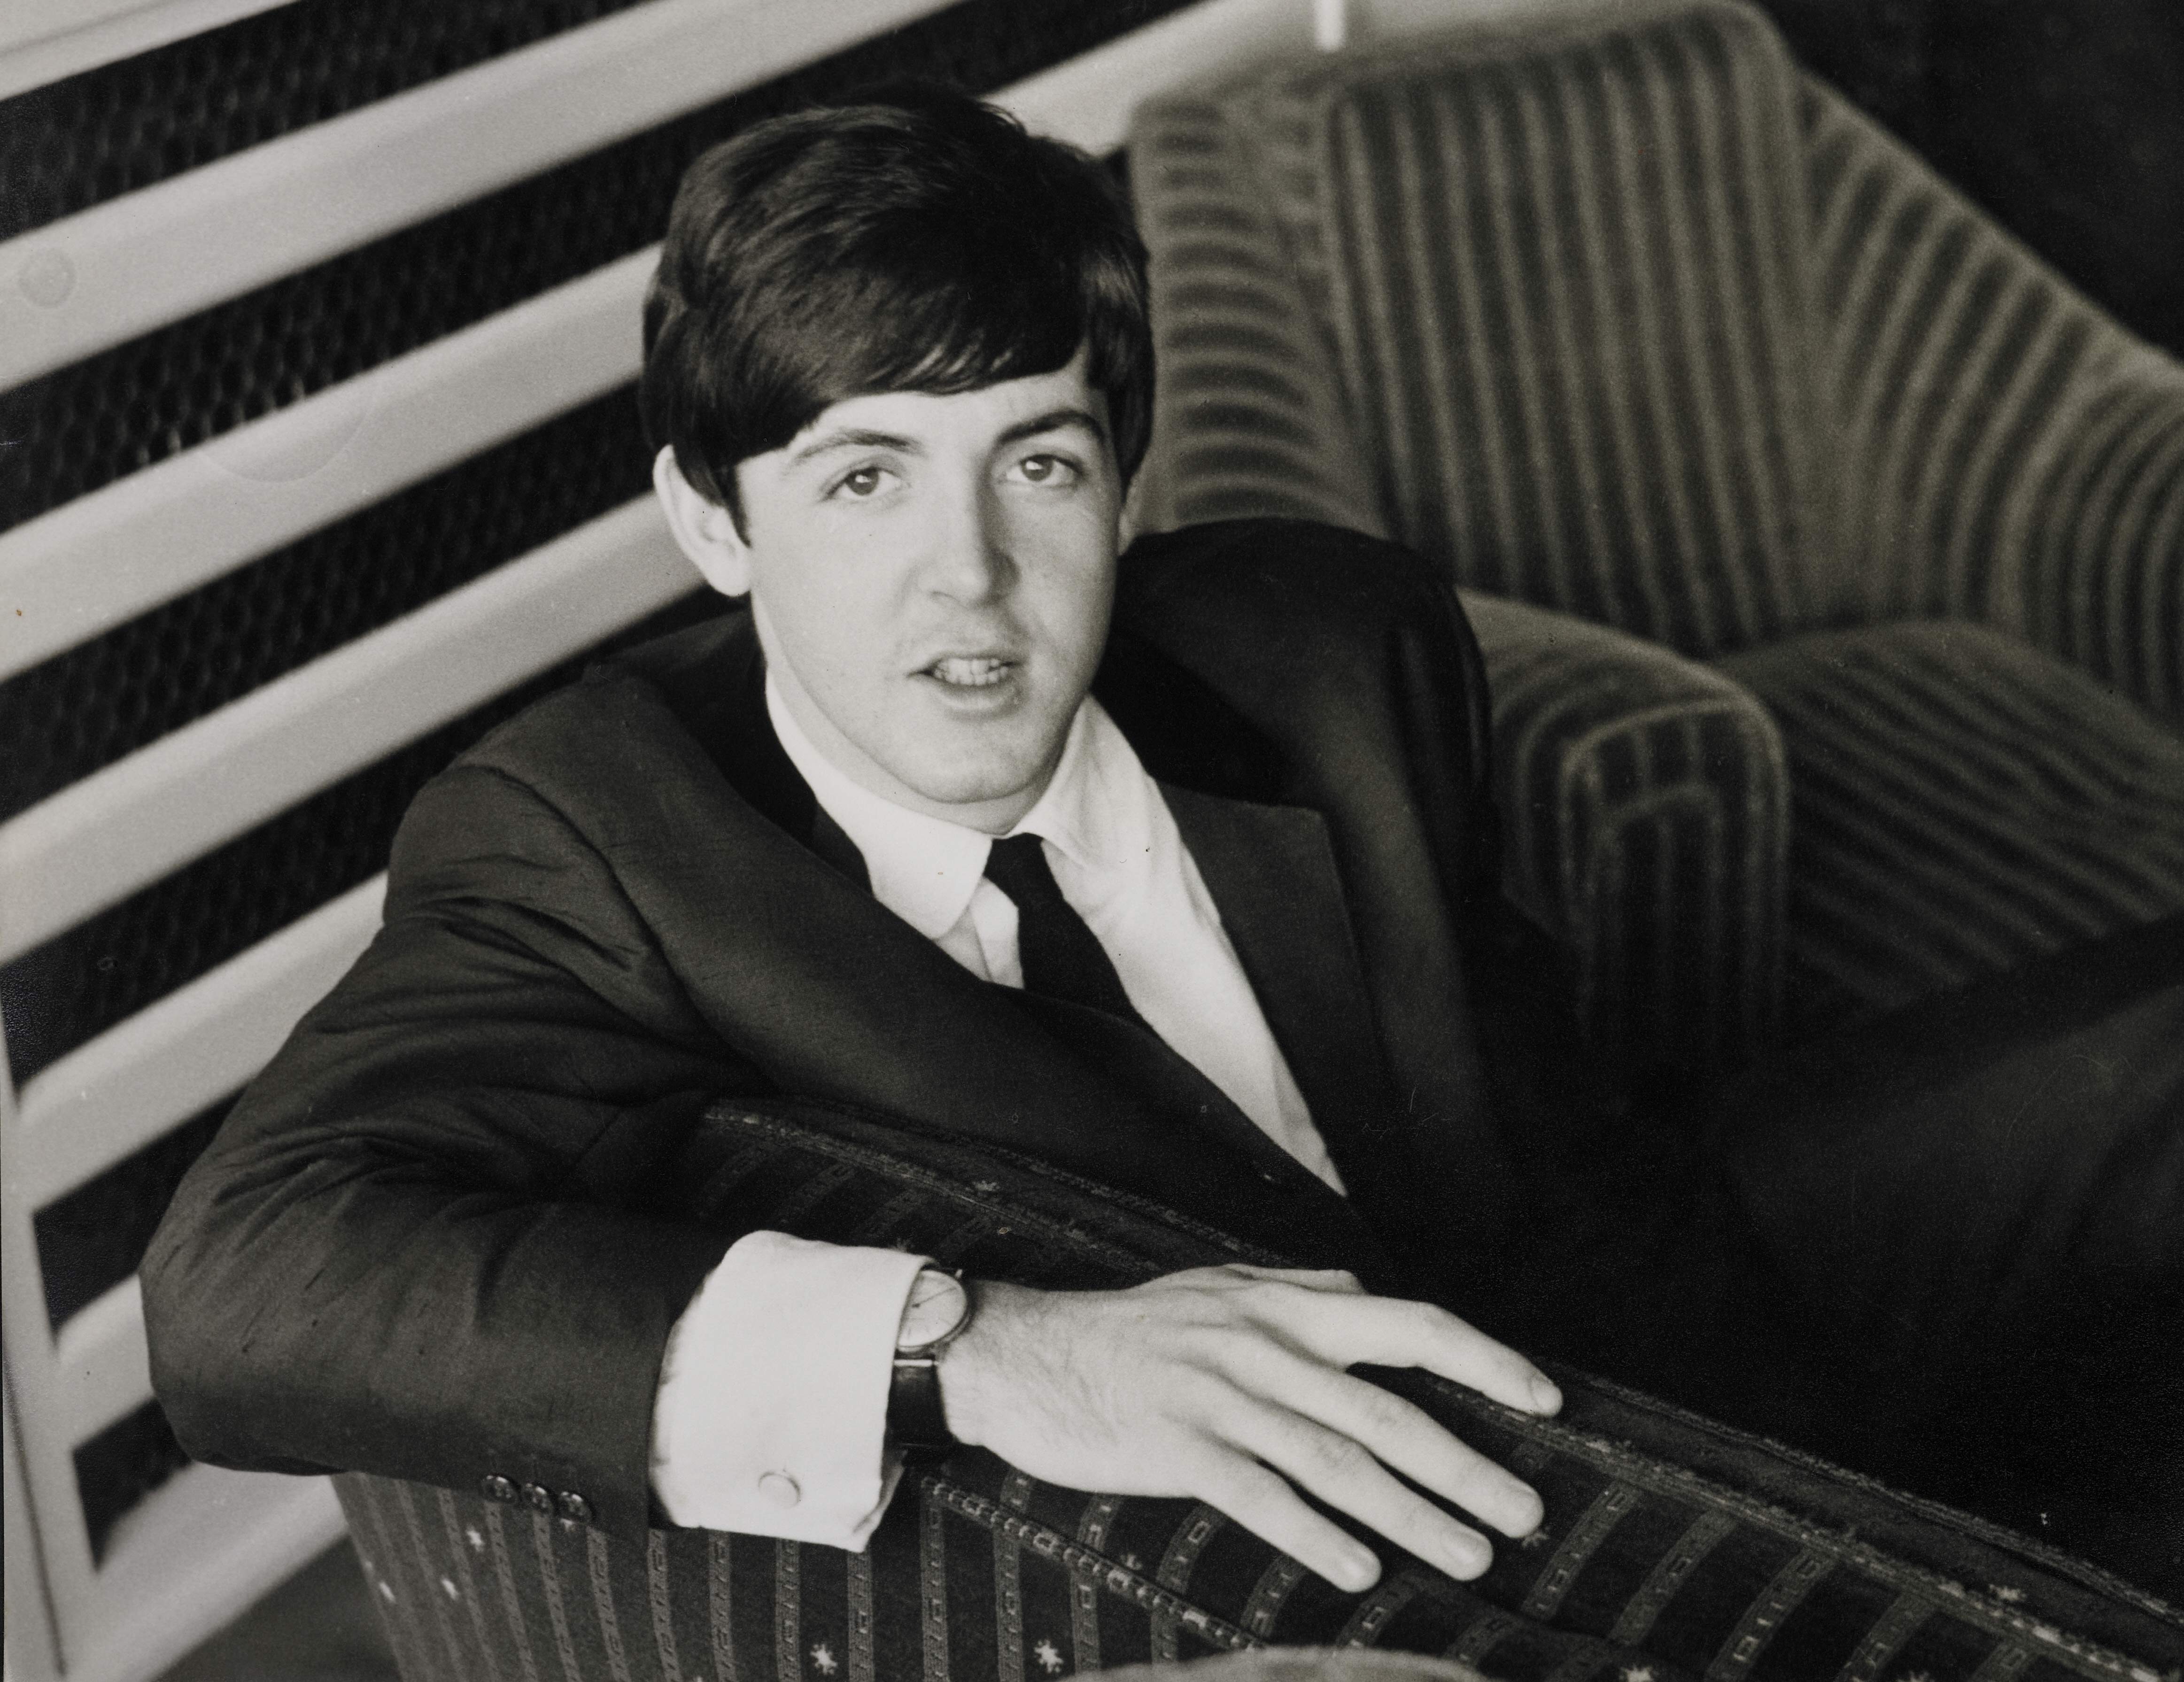 Paul McCartney sitting in a chair during The Beatles' "Can't Buy Me Love" era